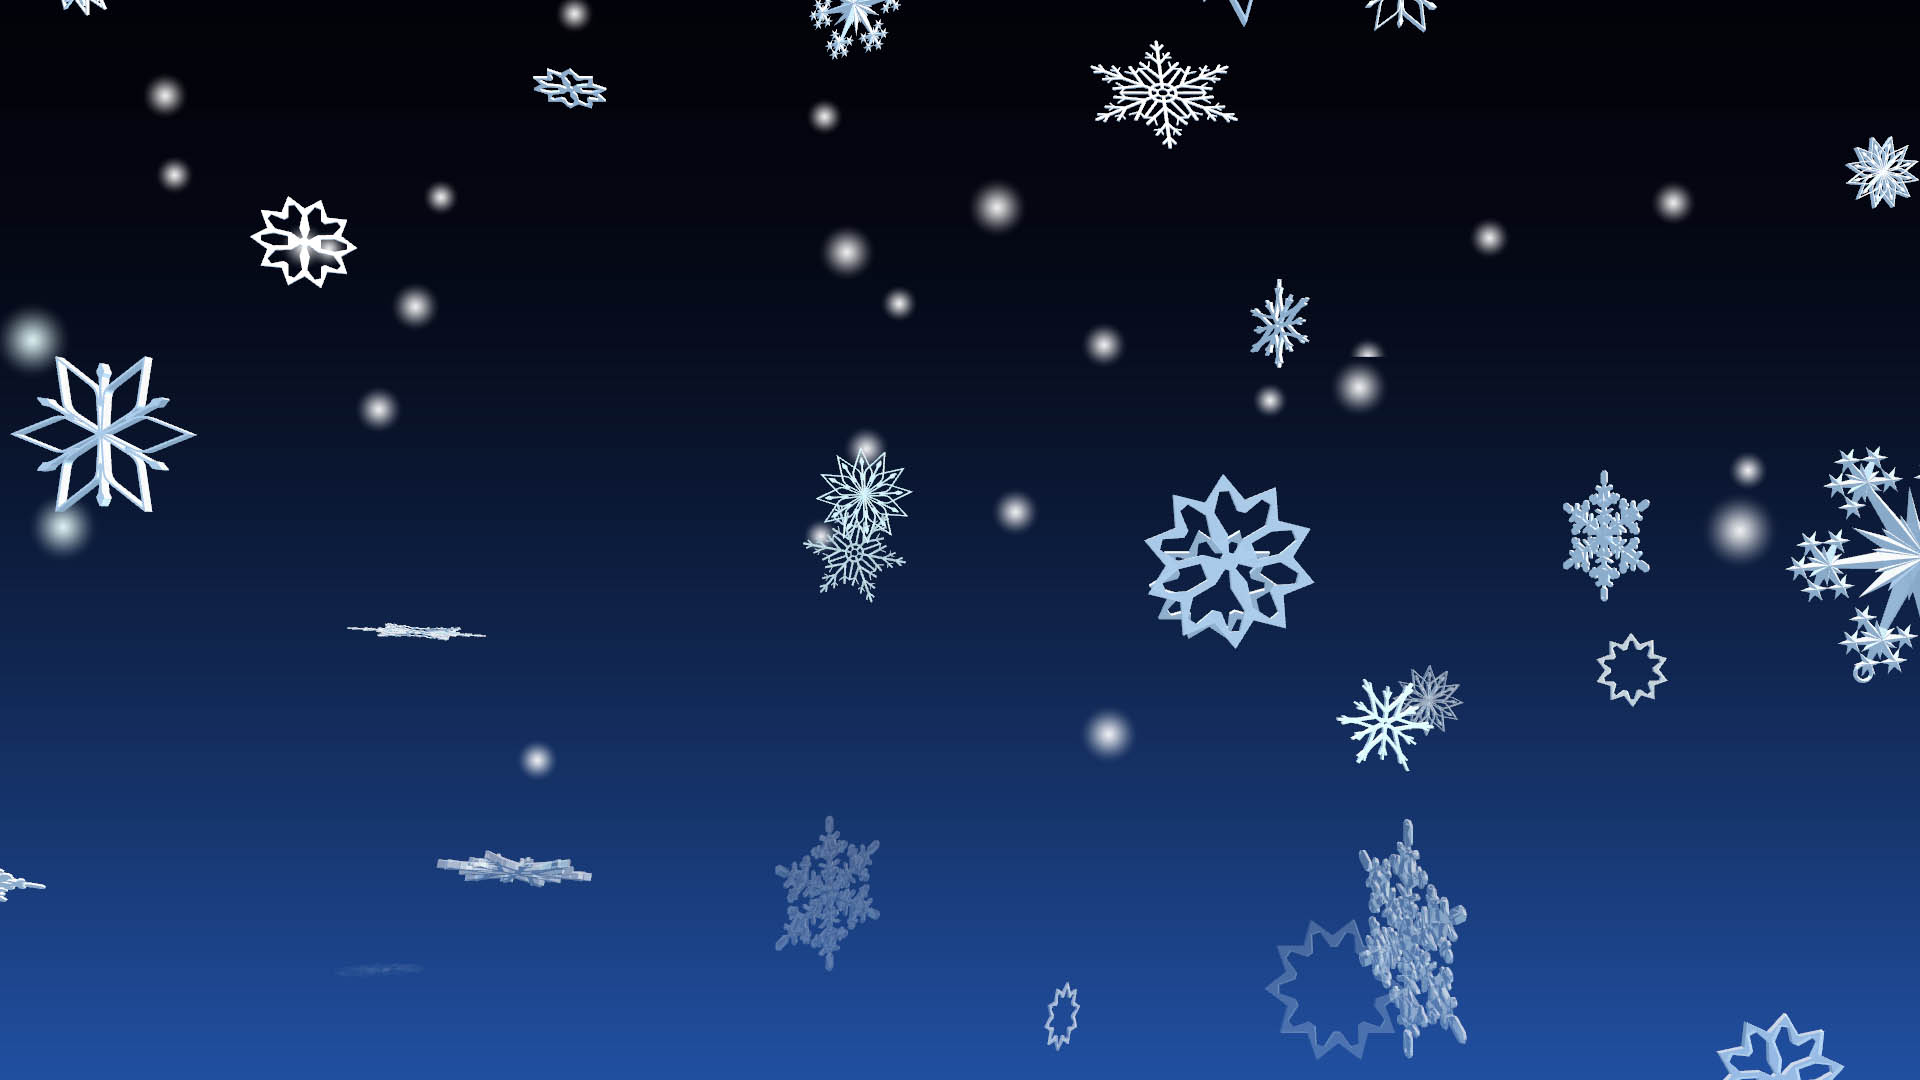 how can i find free animated snowflakes for os x screensaver